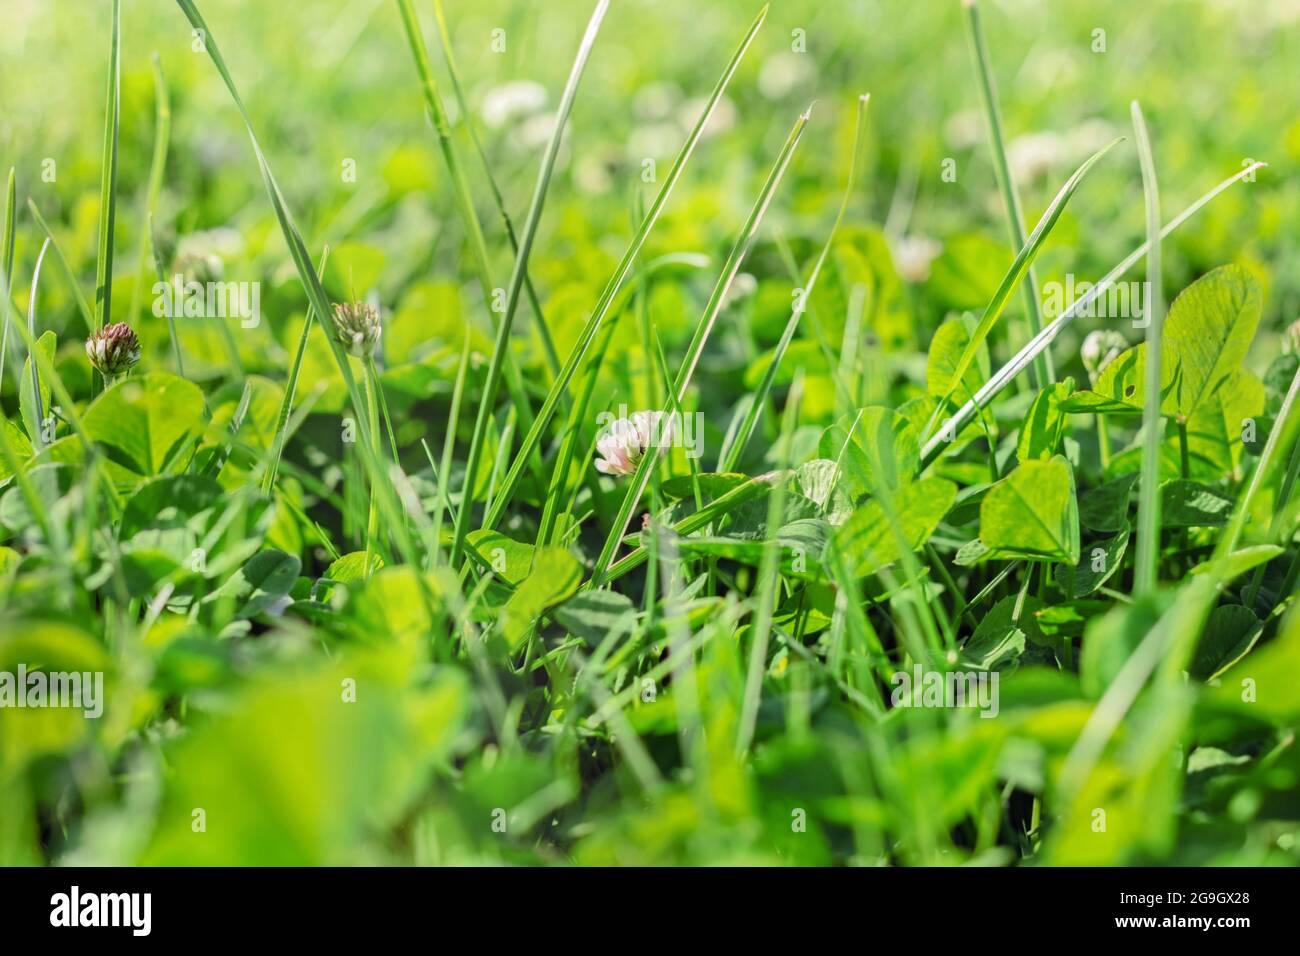 Real charming green grass on large sunny happy relax day Stock Photo